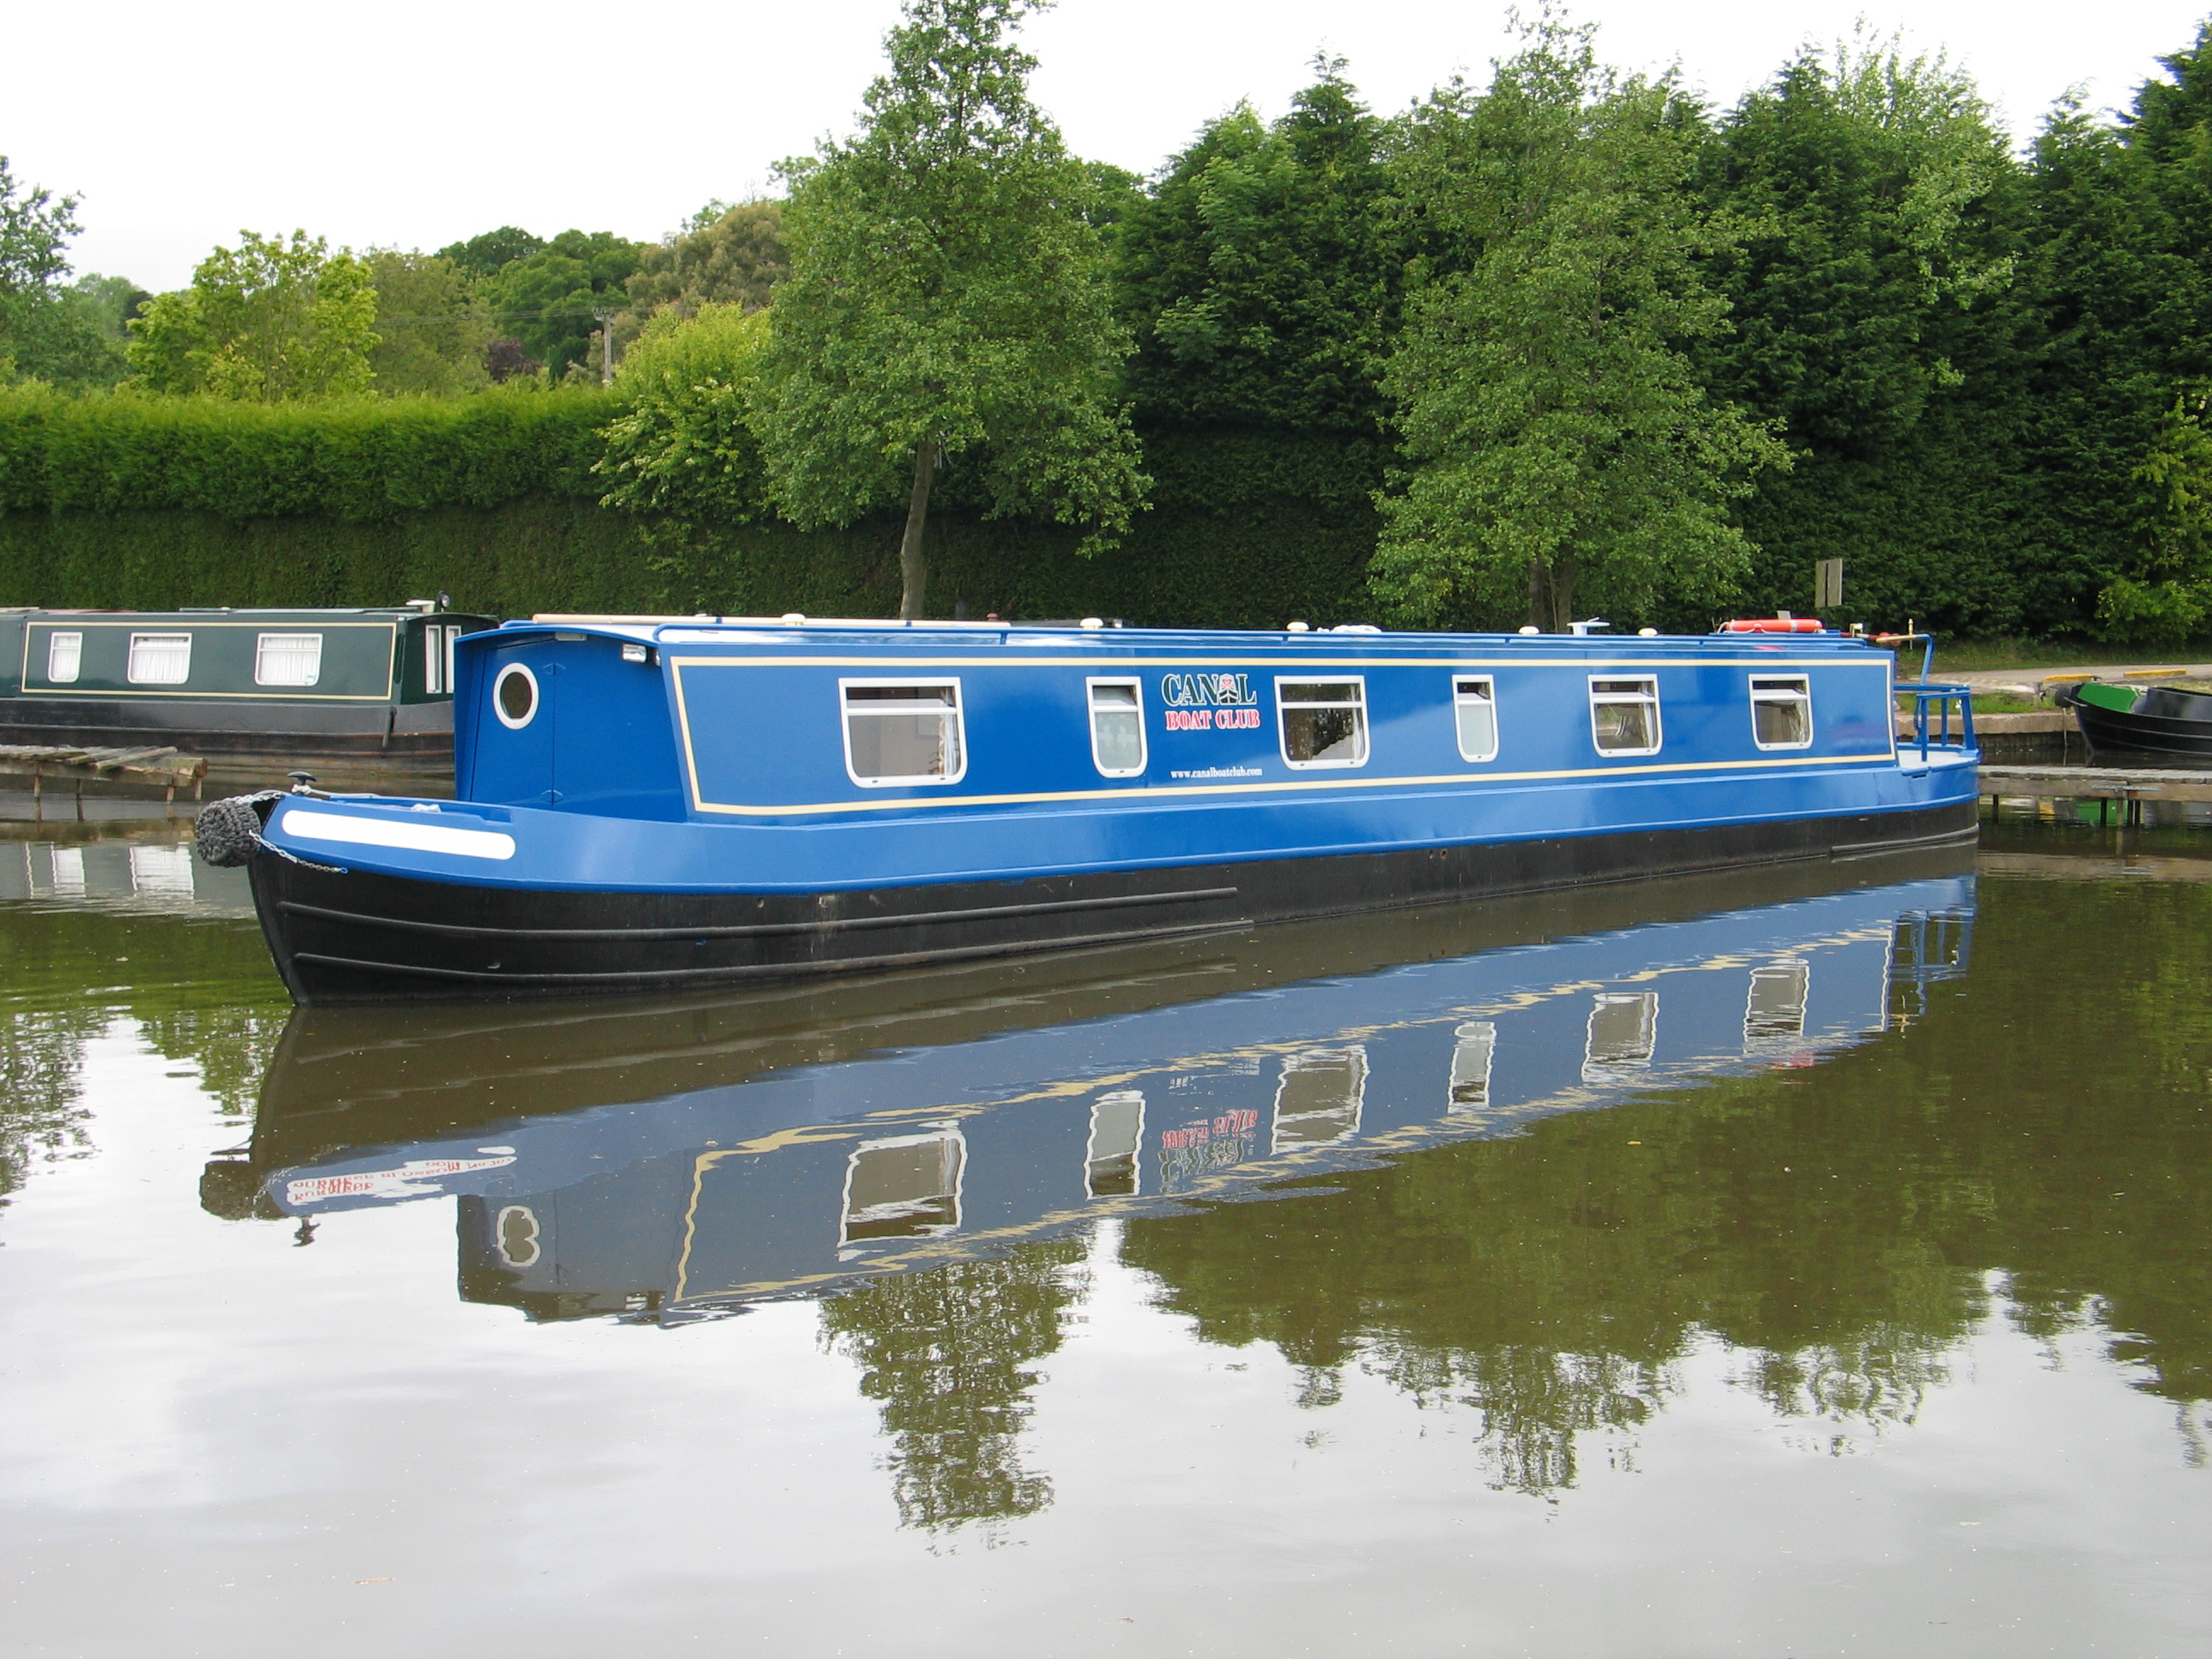 The CBC6 class canal boat